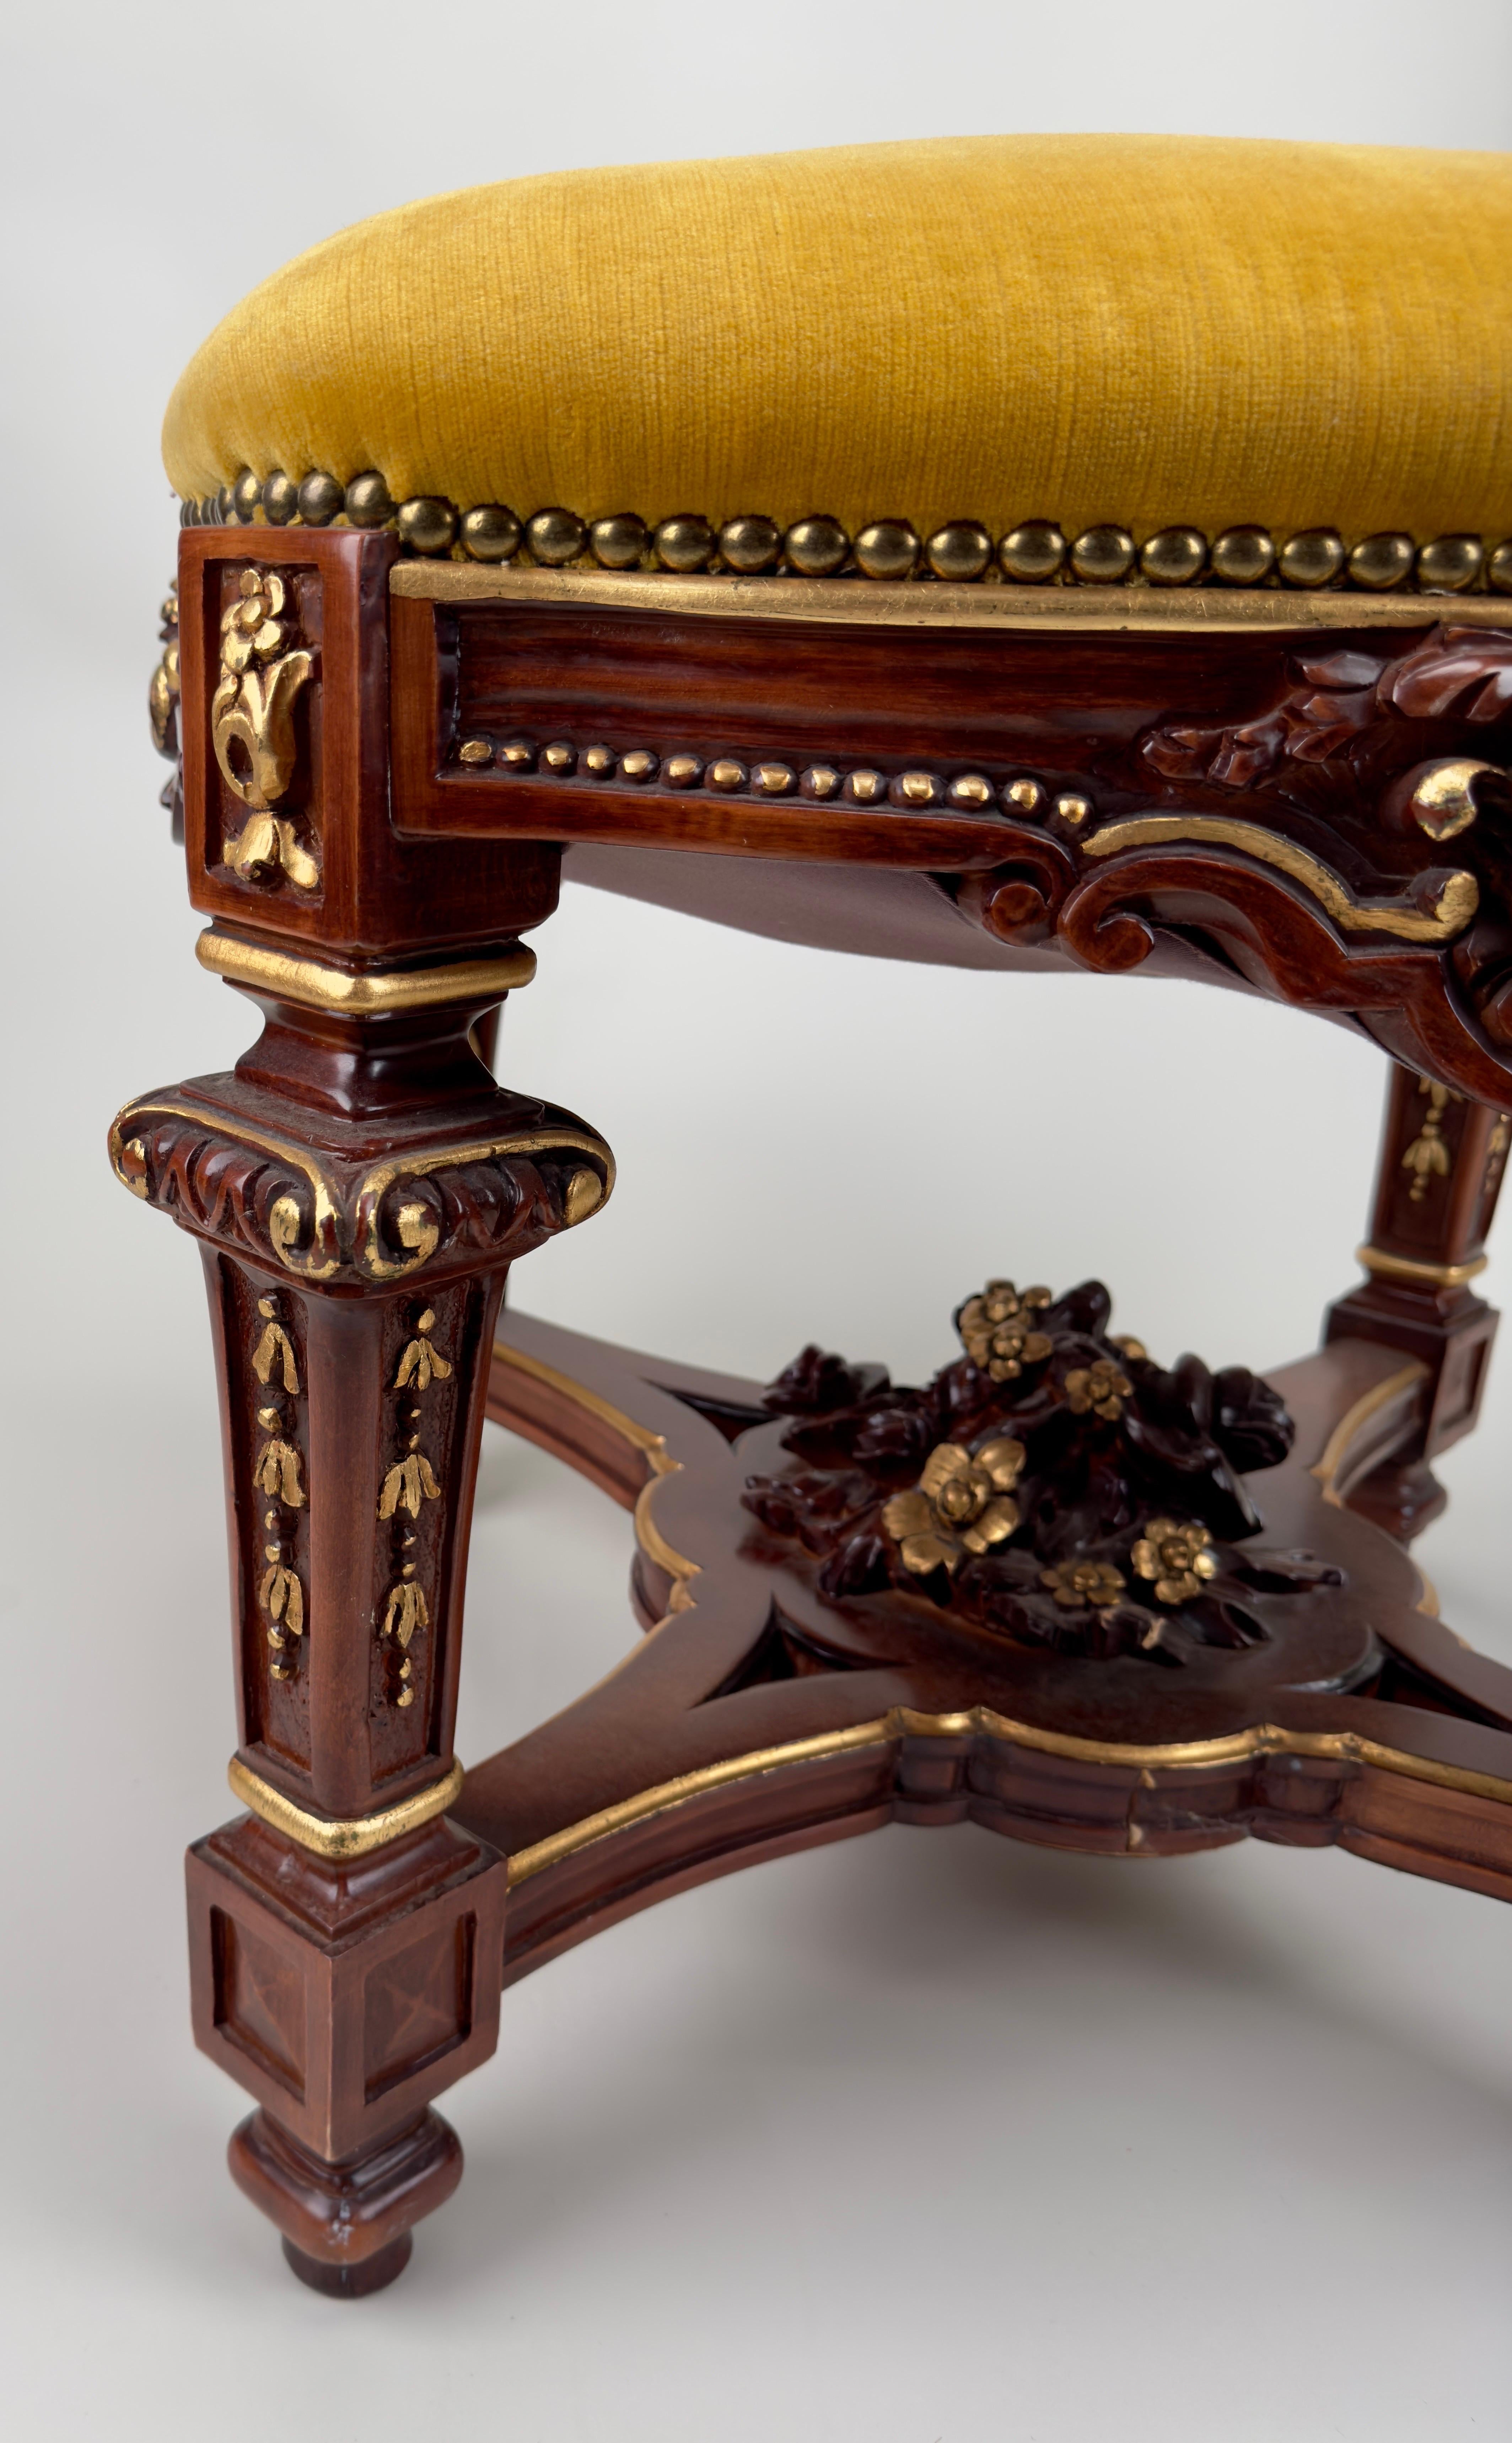 Carved Italian Baroque Style Mahogany & Yellow Mustard Velvet Cushion Ottoman or Bench  For Sale